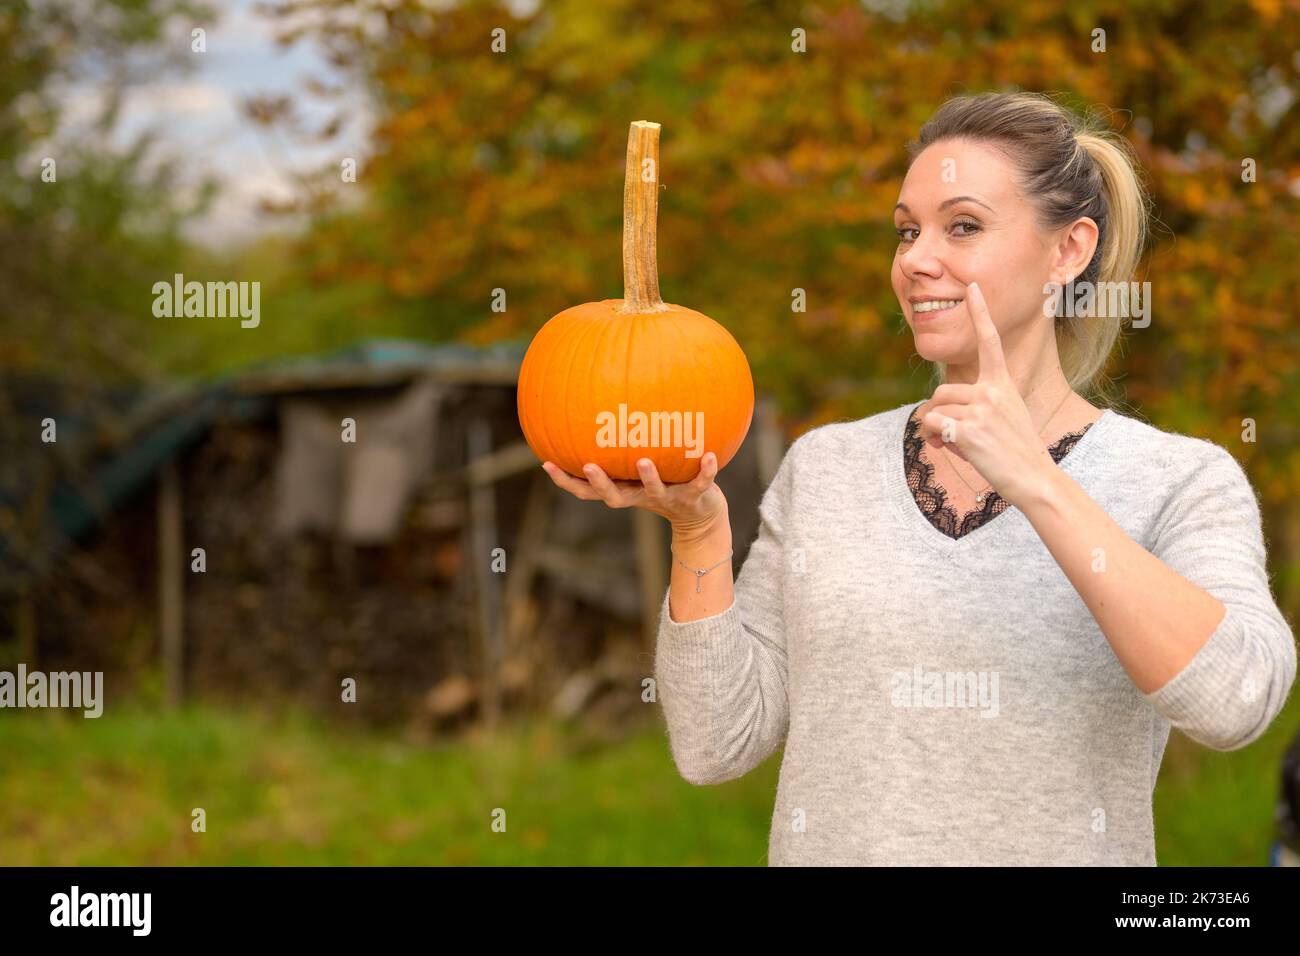 Pretty middle aged woman holding a small pumpkin in her hand and pointing her finger in the air like a teacher everyone pays attention against an autu Stock Photo